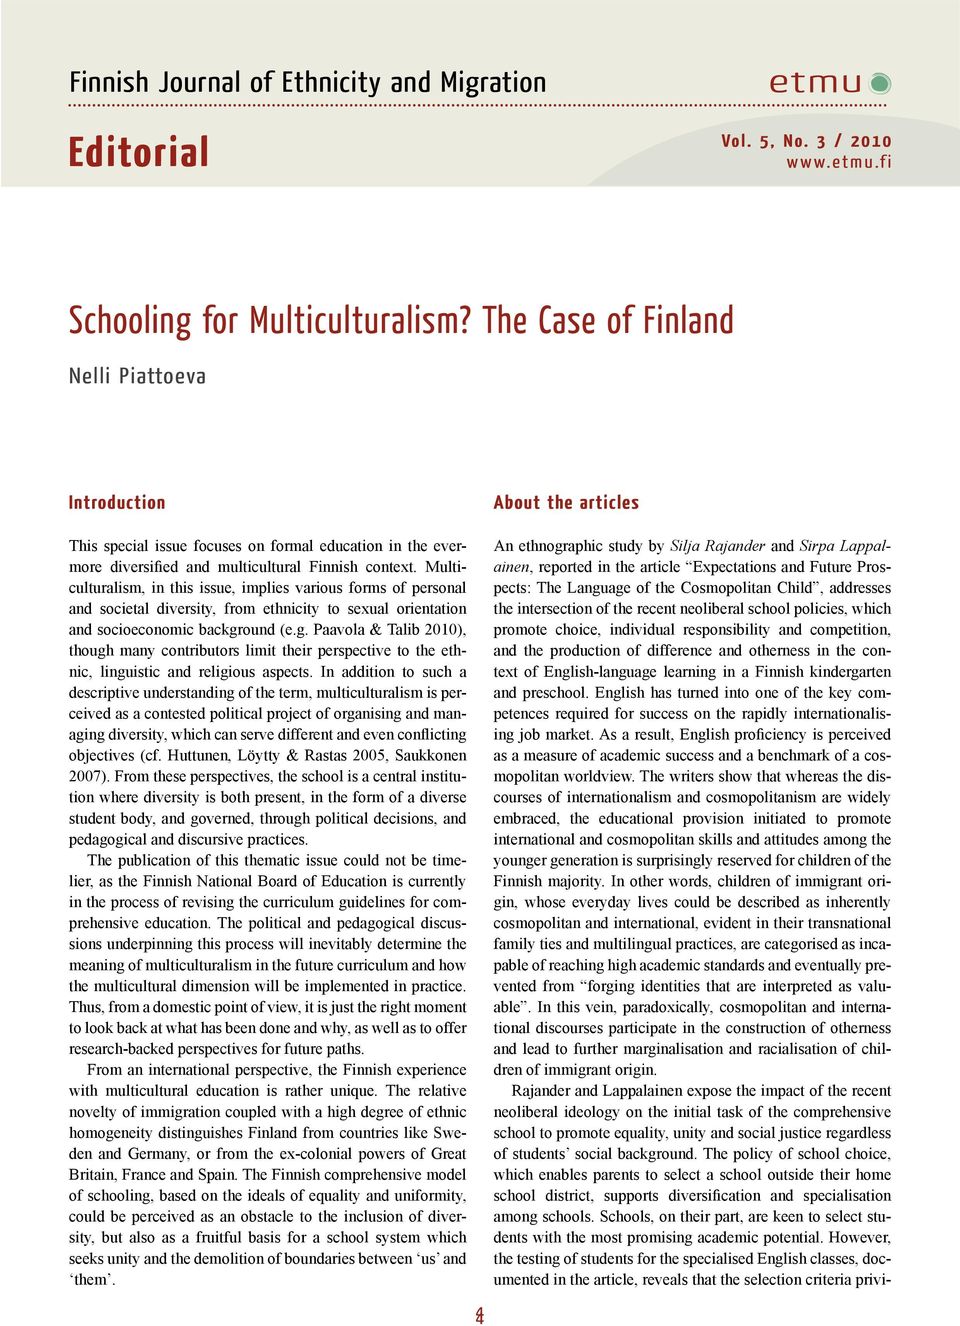 Multiculturalism, in this issue, implies various forms of personal and societal diversity, from ethnicity to sexual orientation and socioeconomic backgr